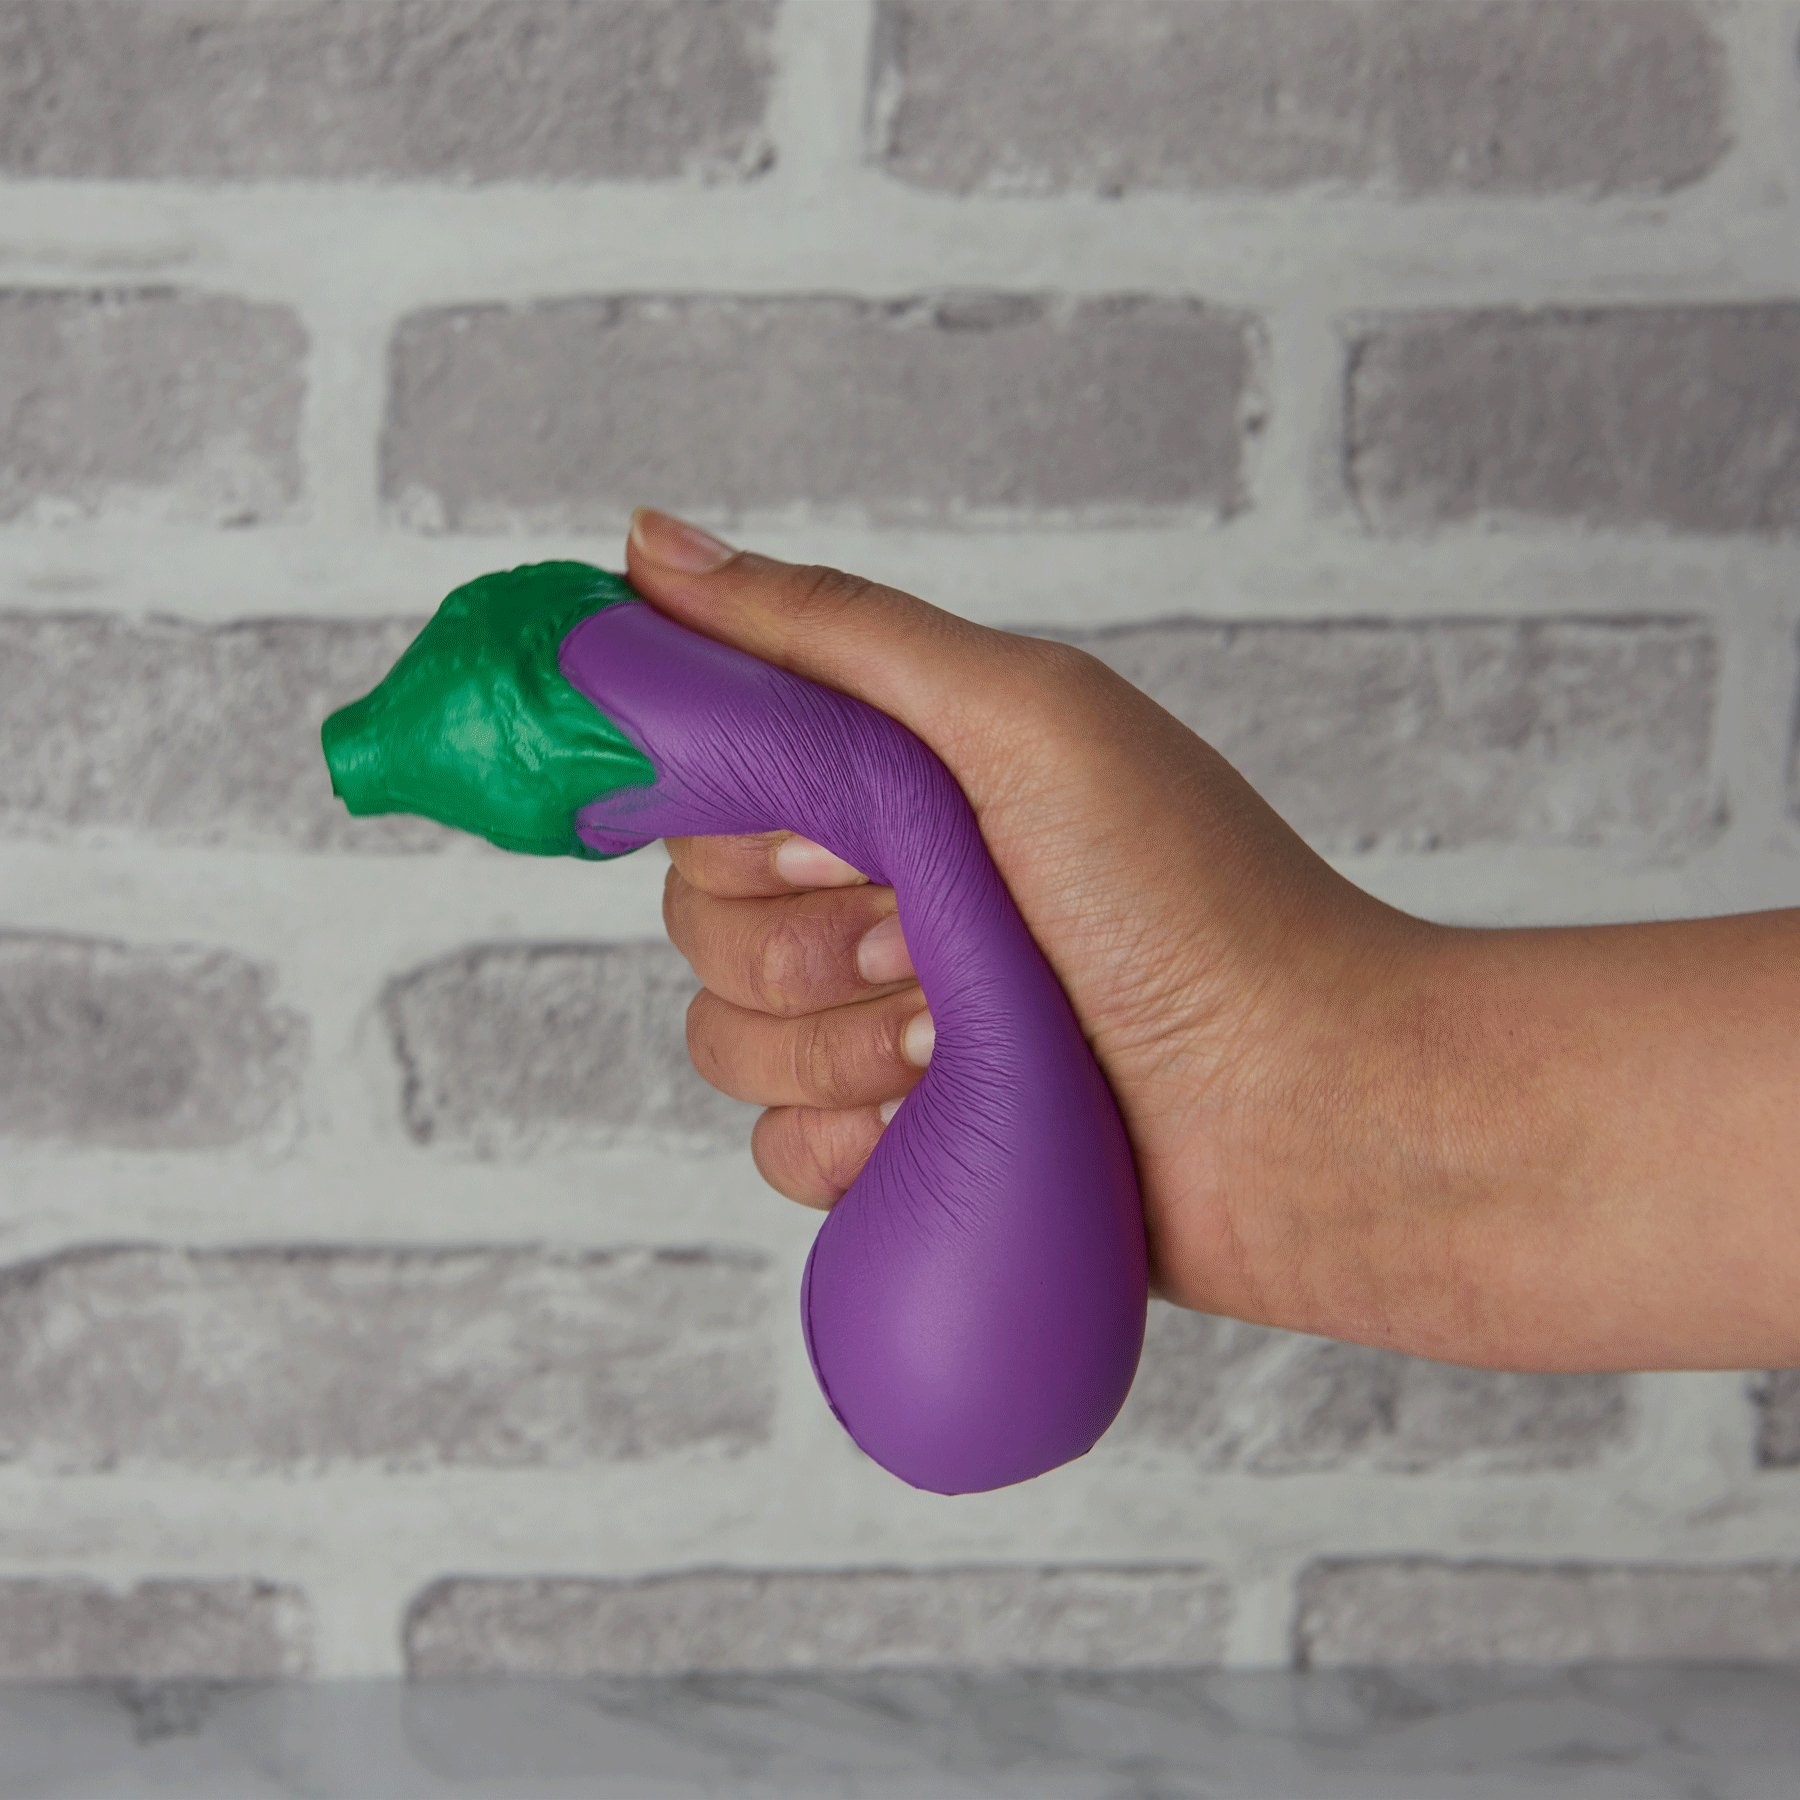 A person squeezing an eggplant stress toy